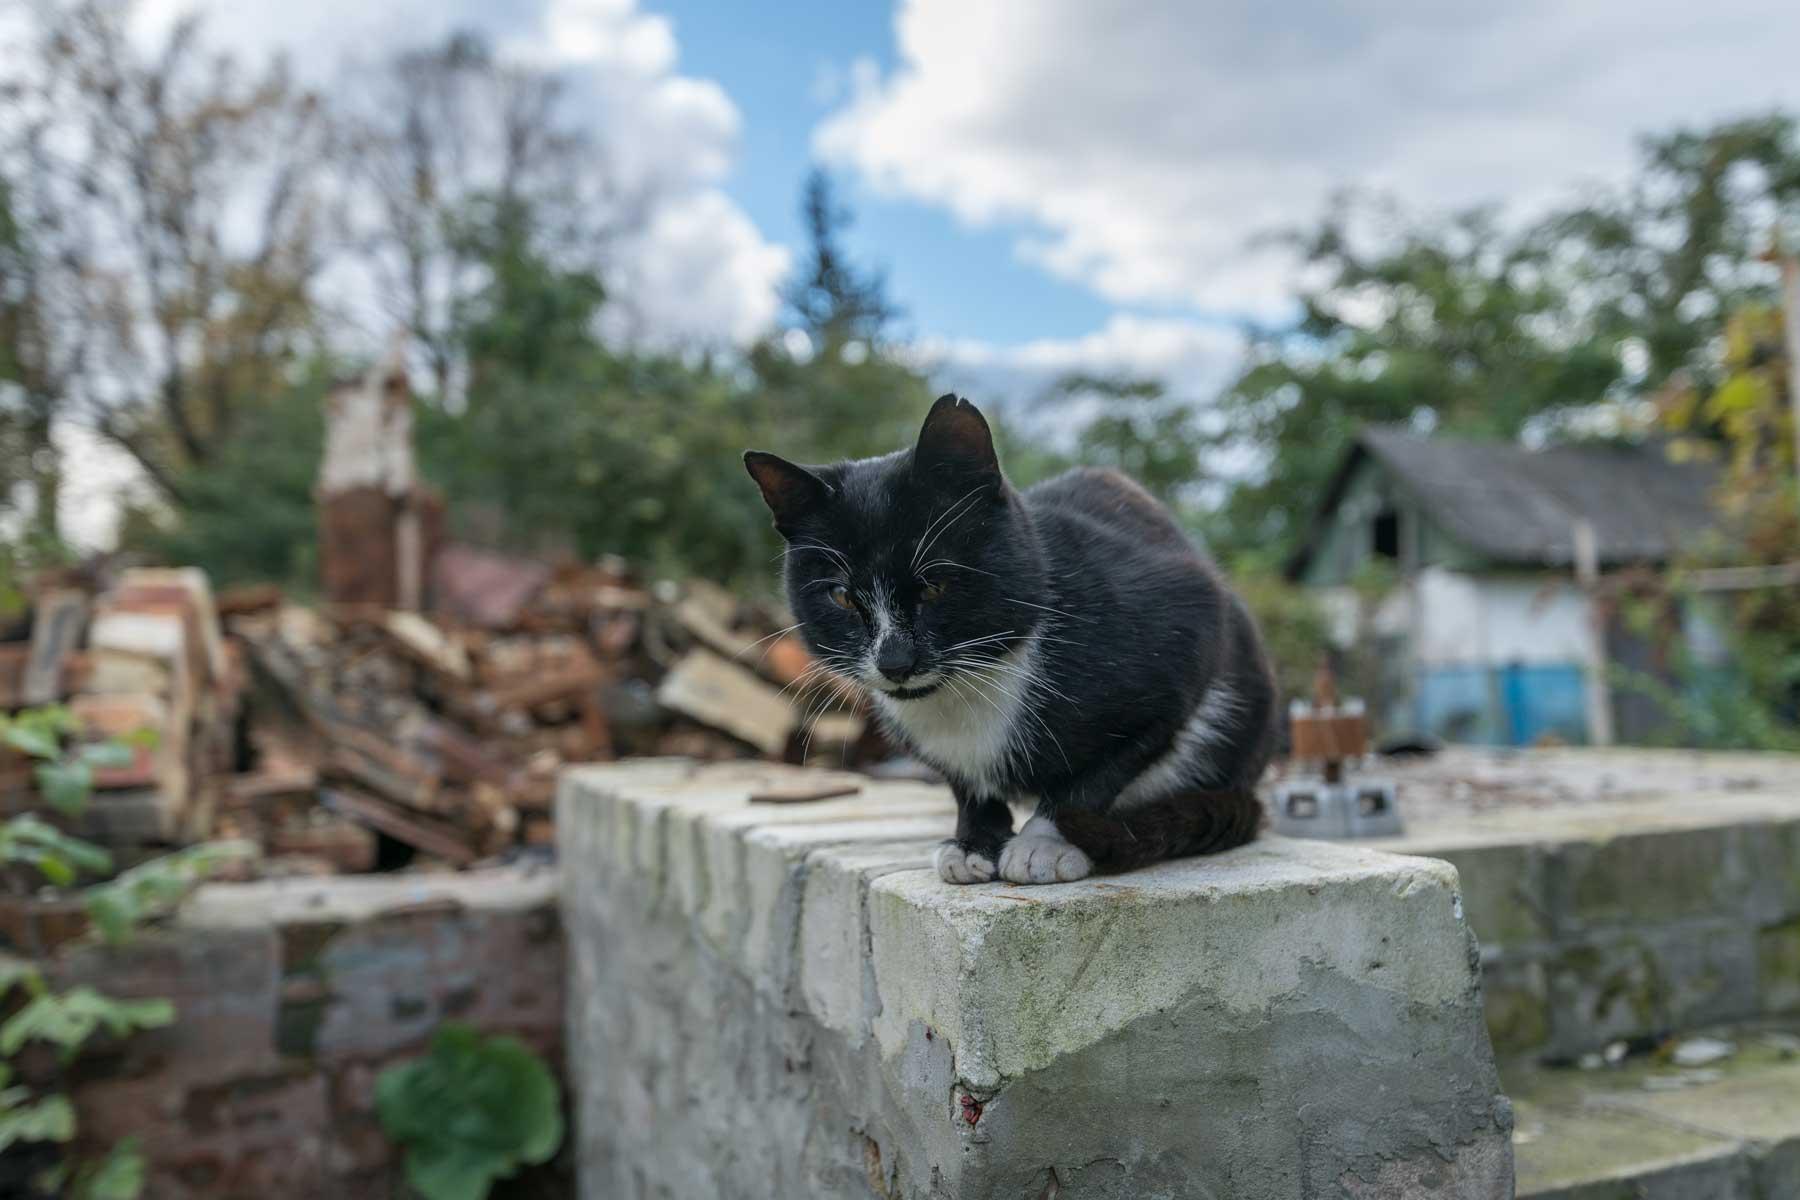 Five-year-old cat Murchik sits on the steps of what used to be its home in Bil’machivka. Photo: LWF/ Albin Hillert